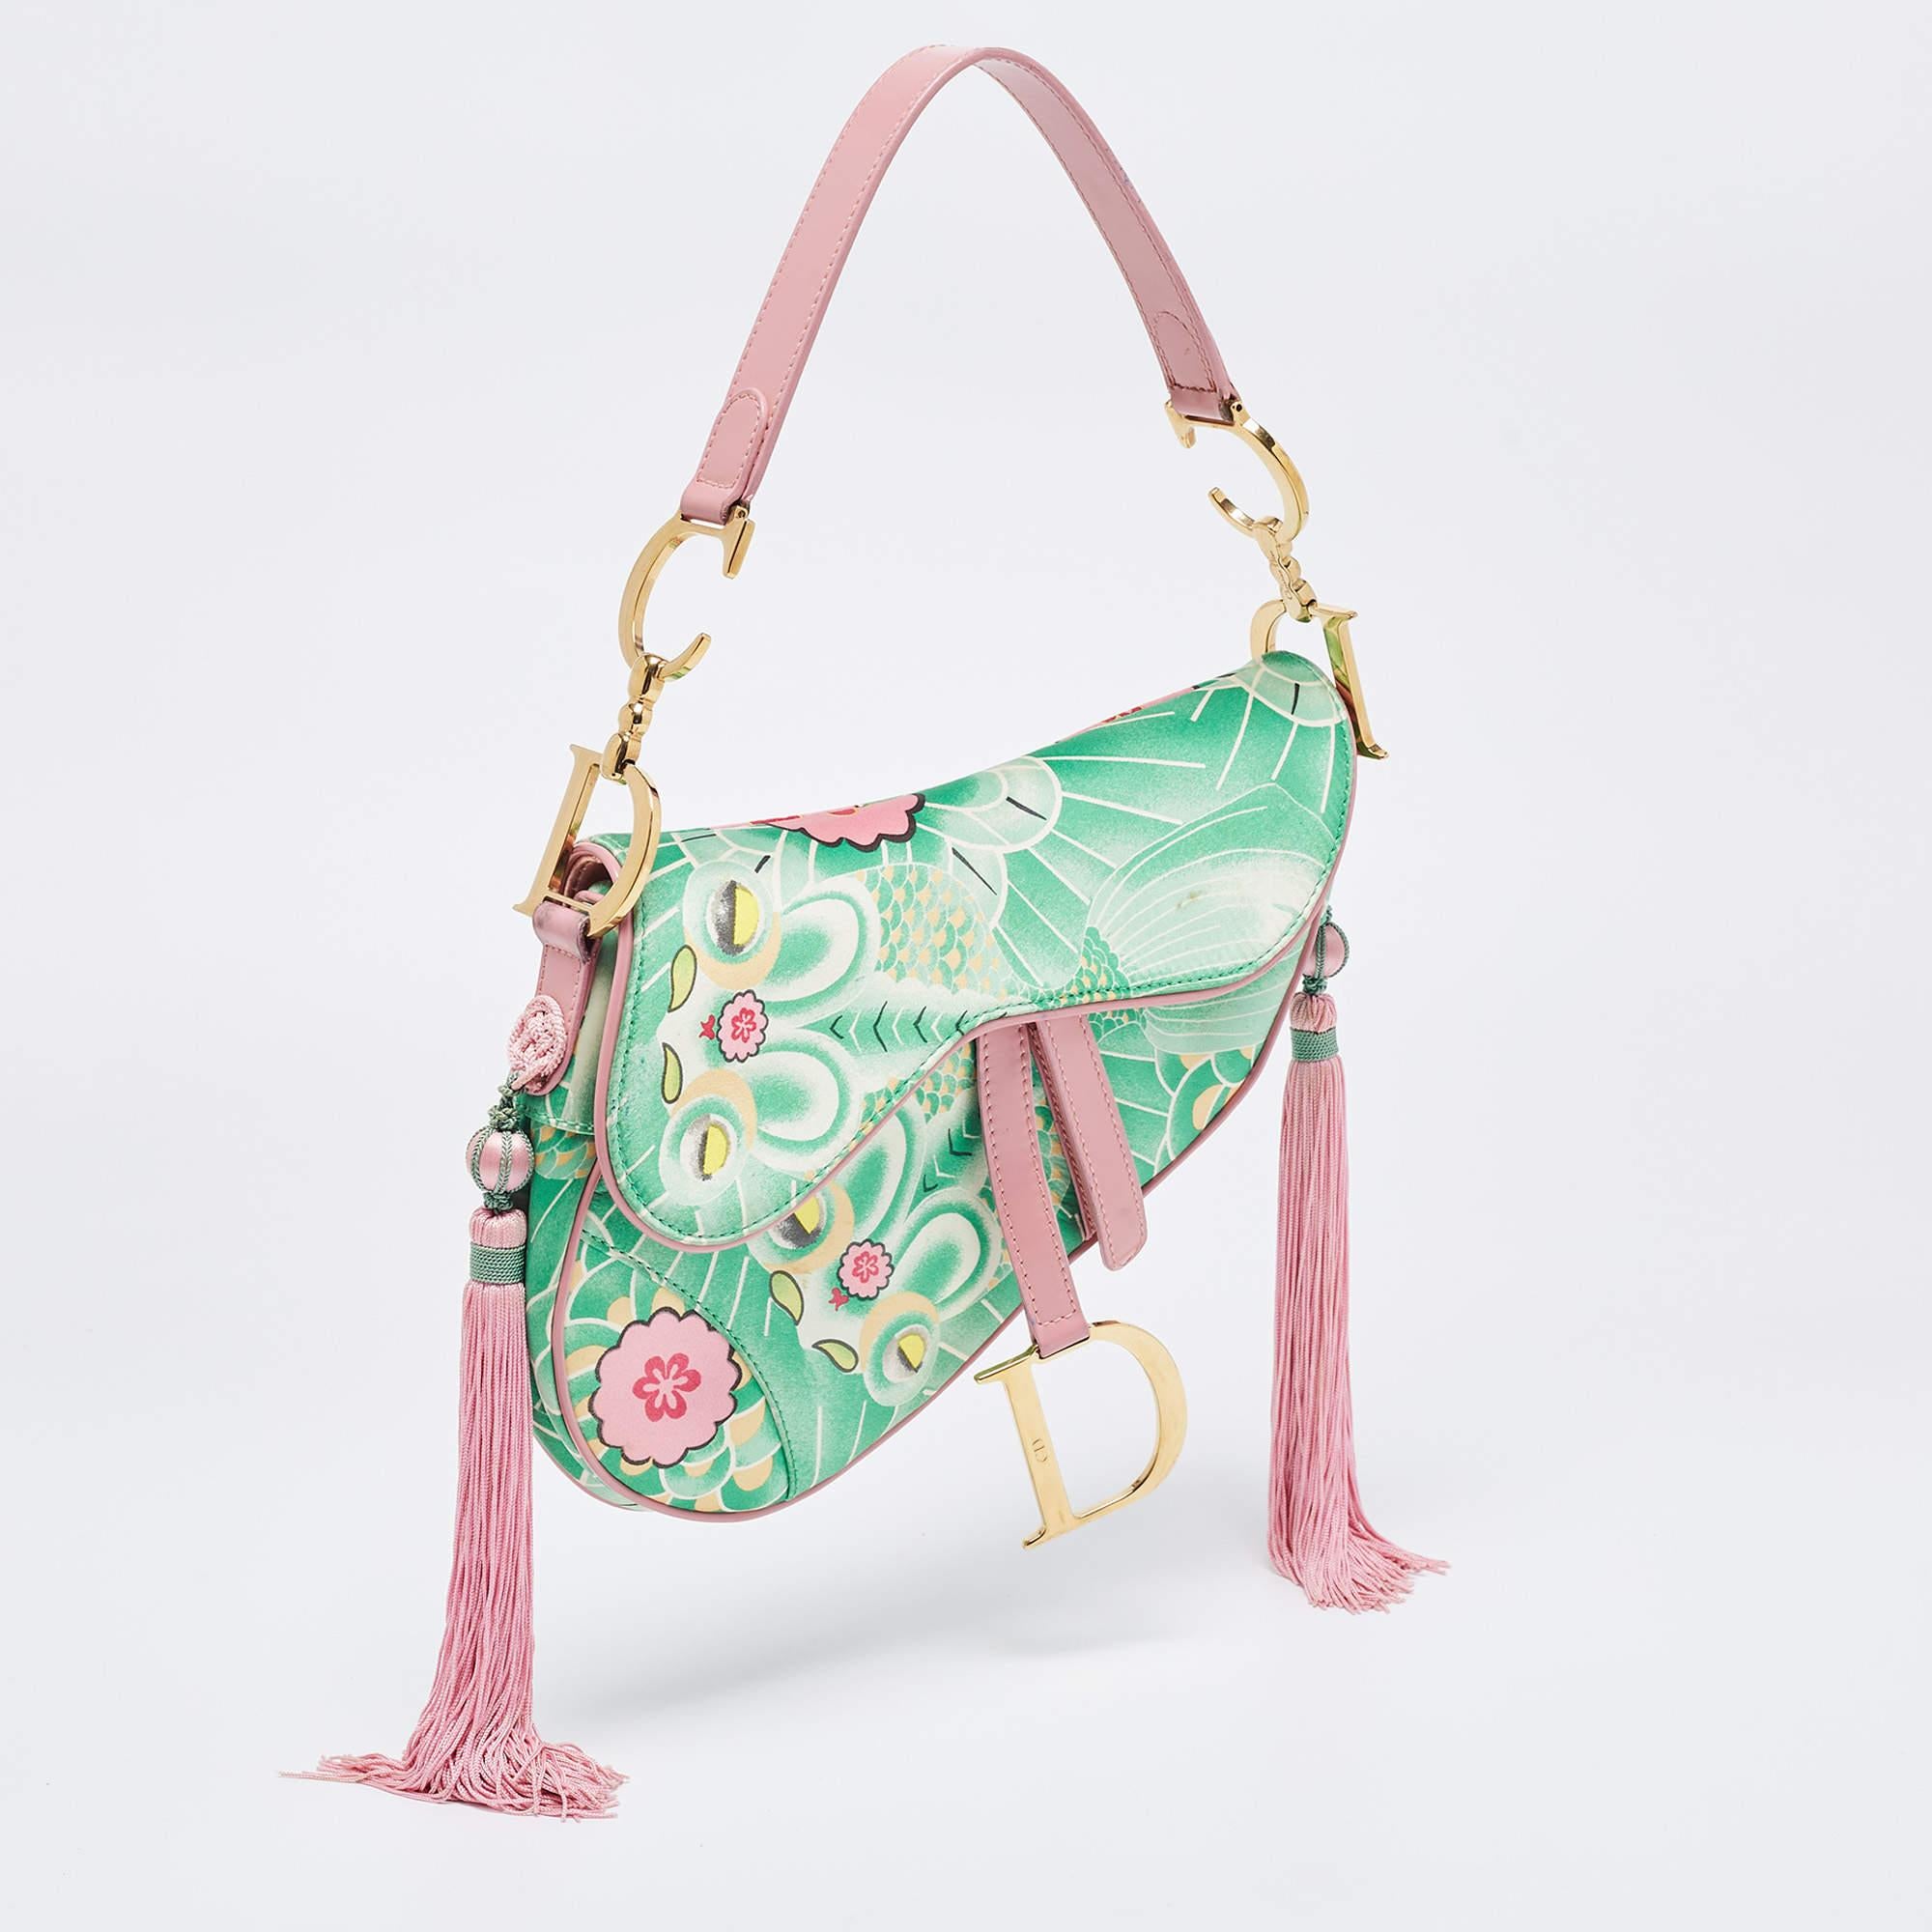 Designed by John Galliano, the Dior Saddle bag is an investment-worthy creation and an icon in the world of handbags. Here, we have a limited edition version of the bag called the 'Koi Saddle'. It is made from printed satin and detailed with pink